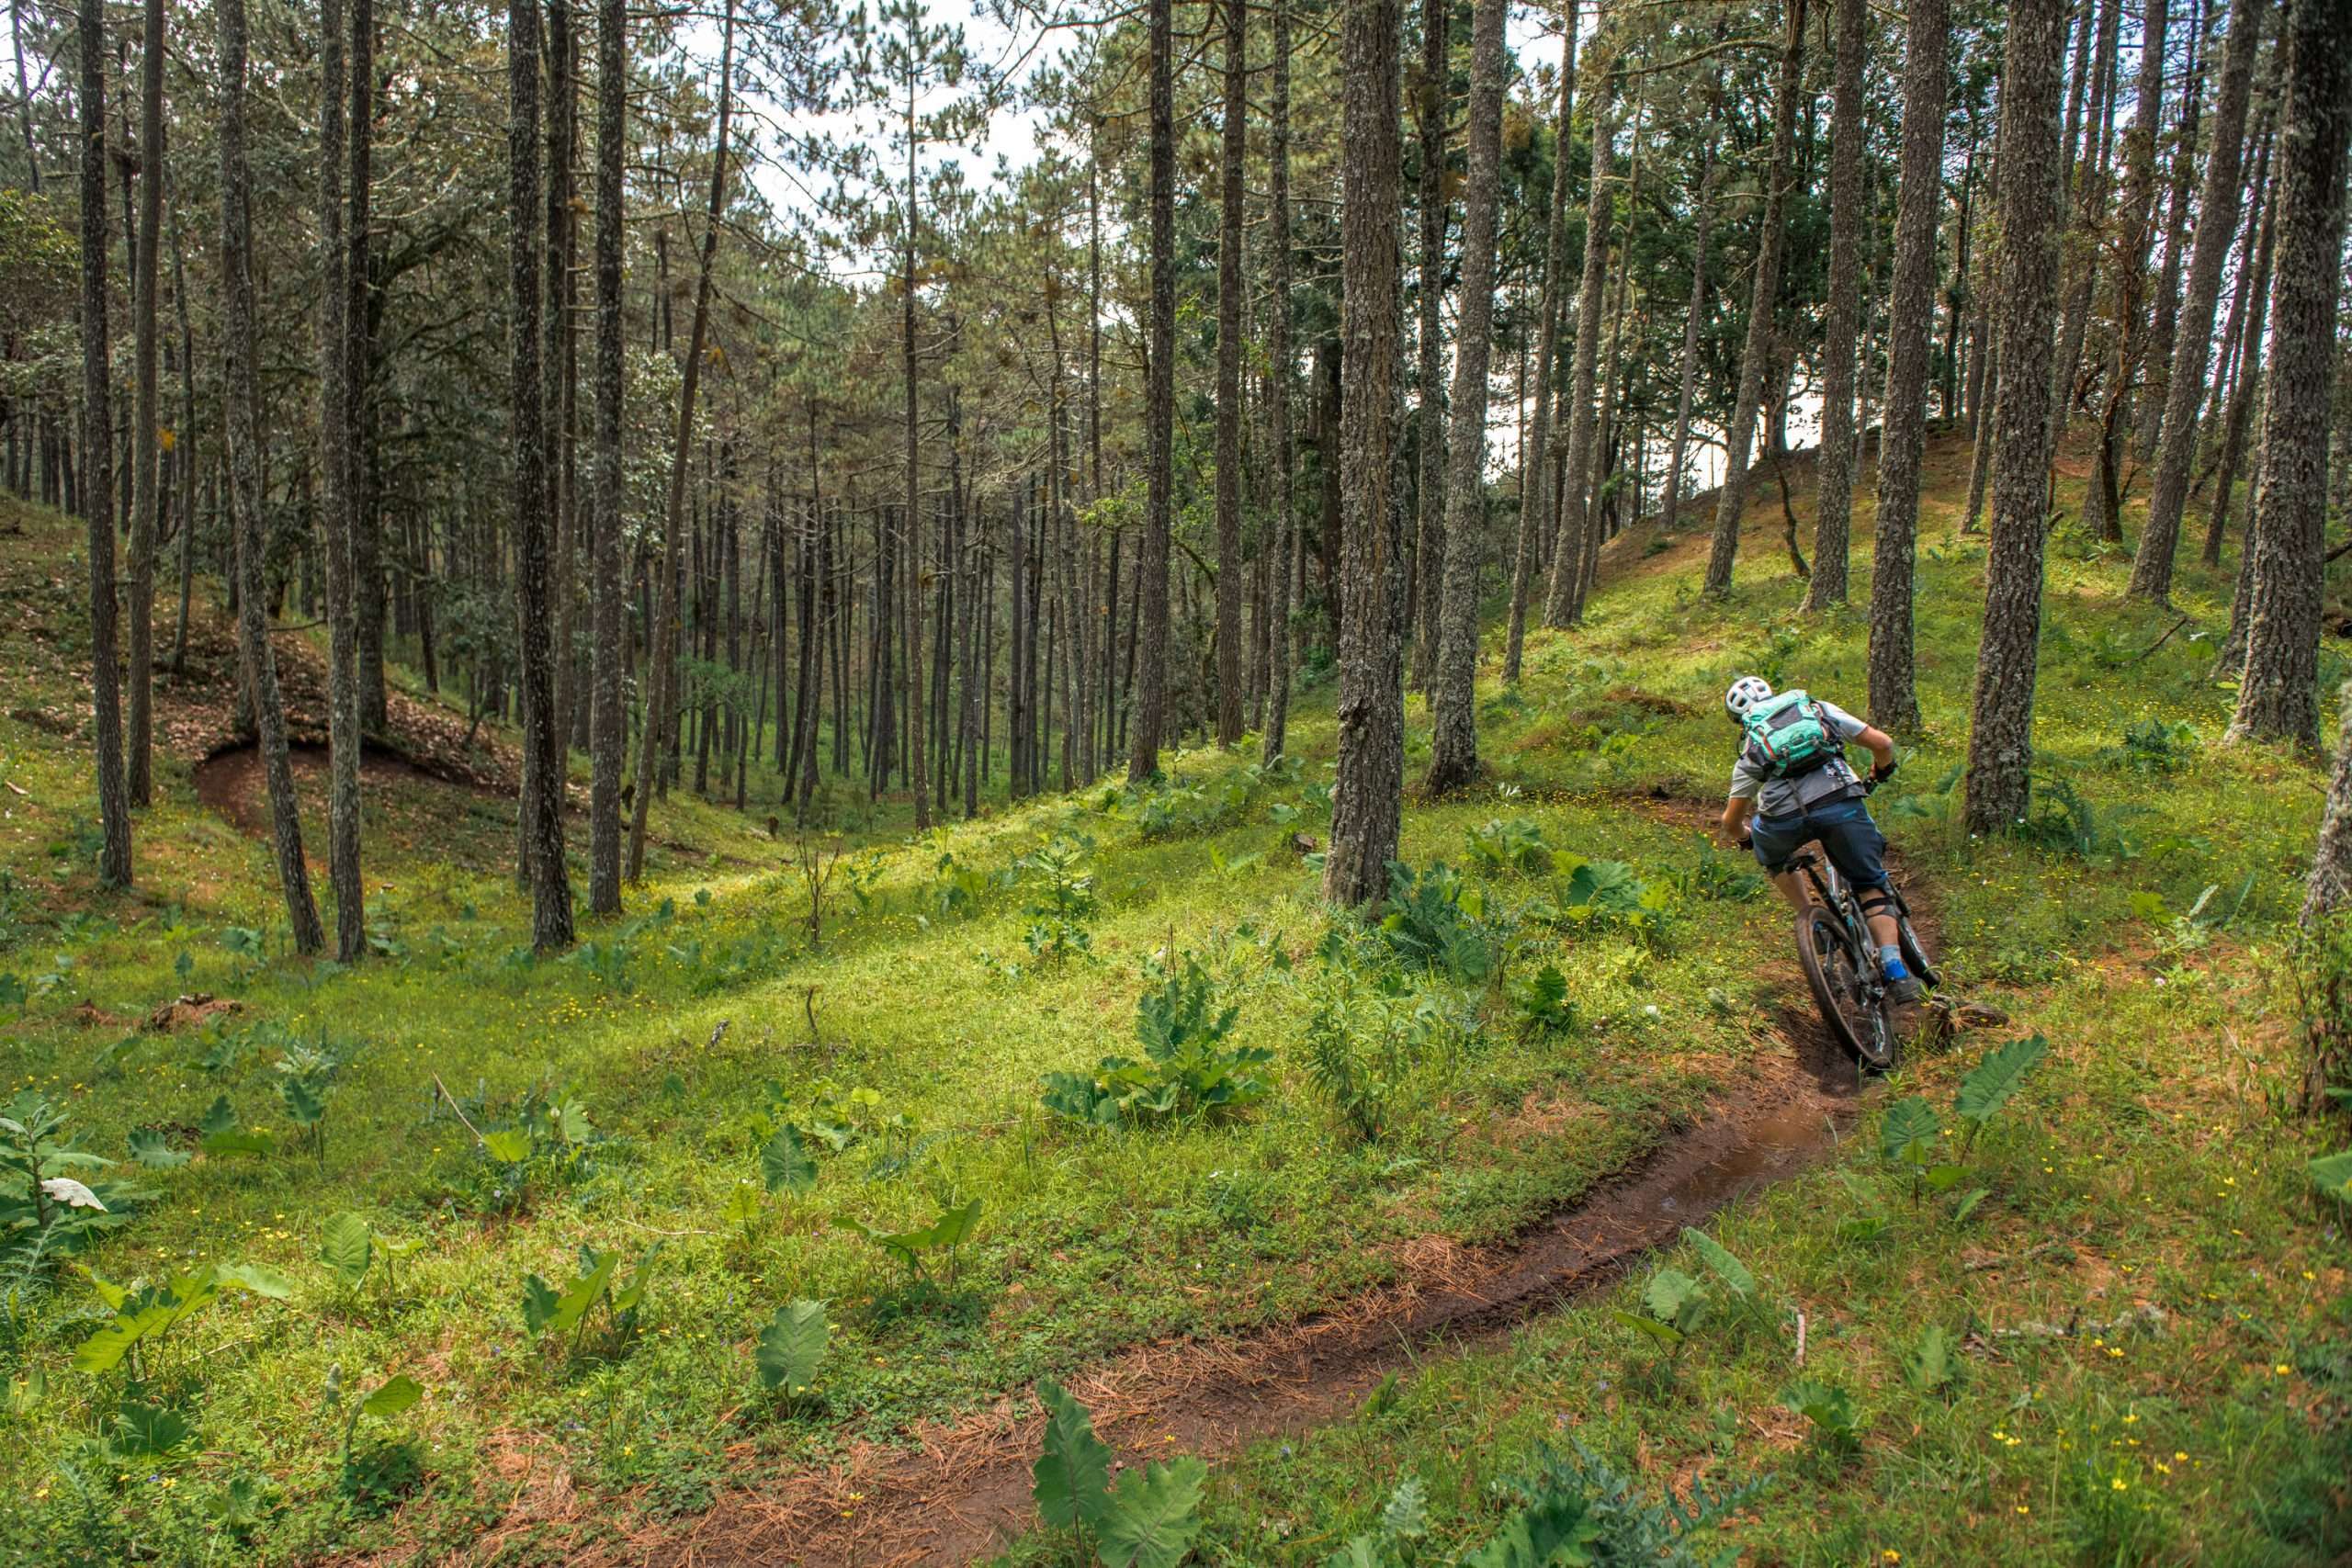 A mountain biker navigates a twisty section of singletrack in a forest, with a vibrant green understory.